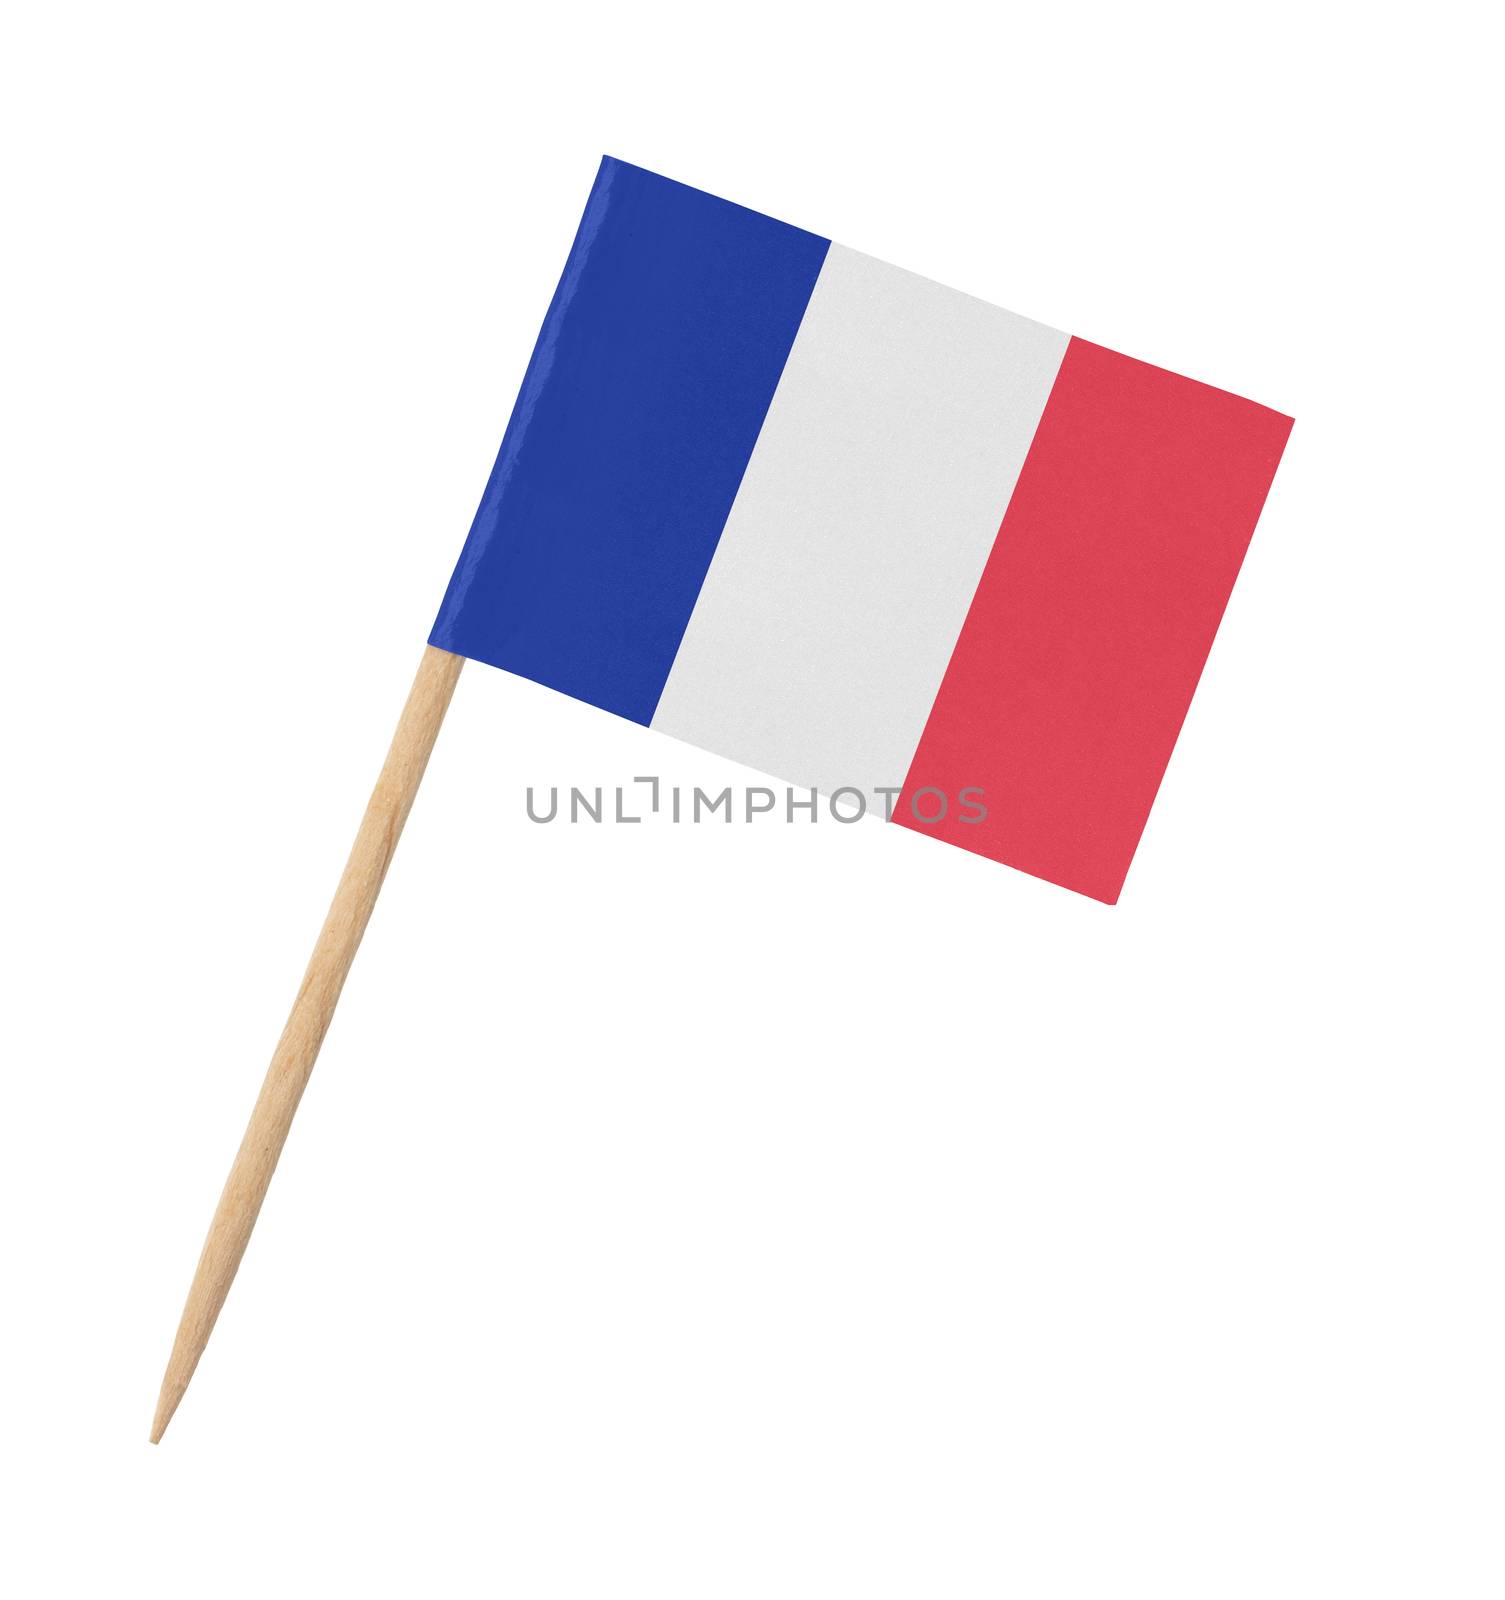 Small paper French flag on wooden stick by michaklootwijk